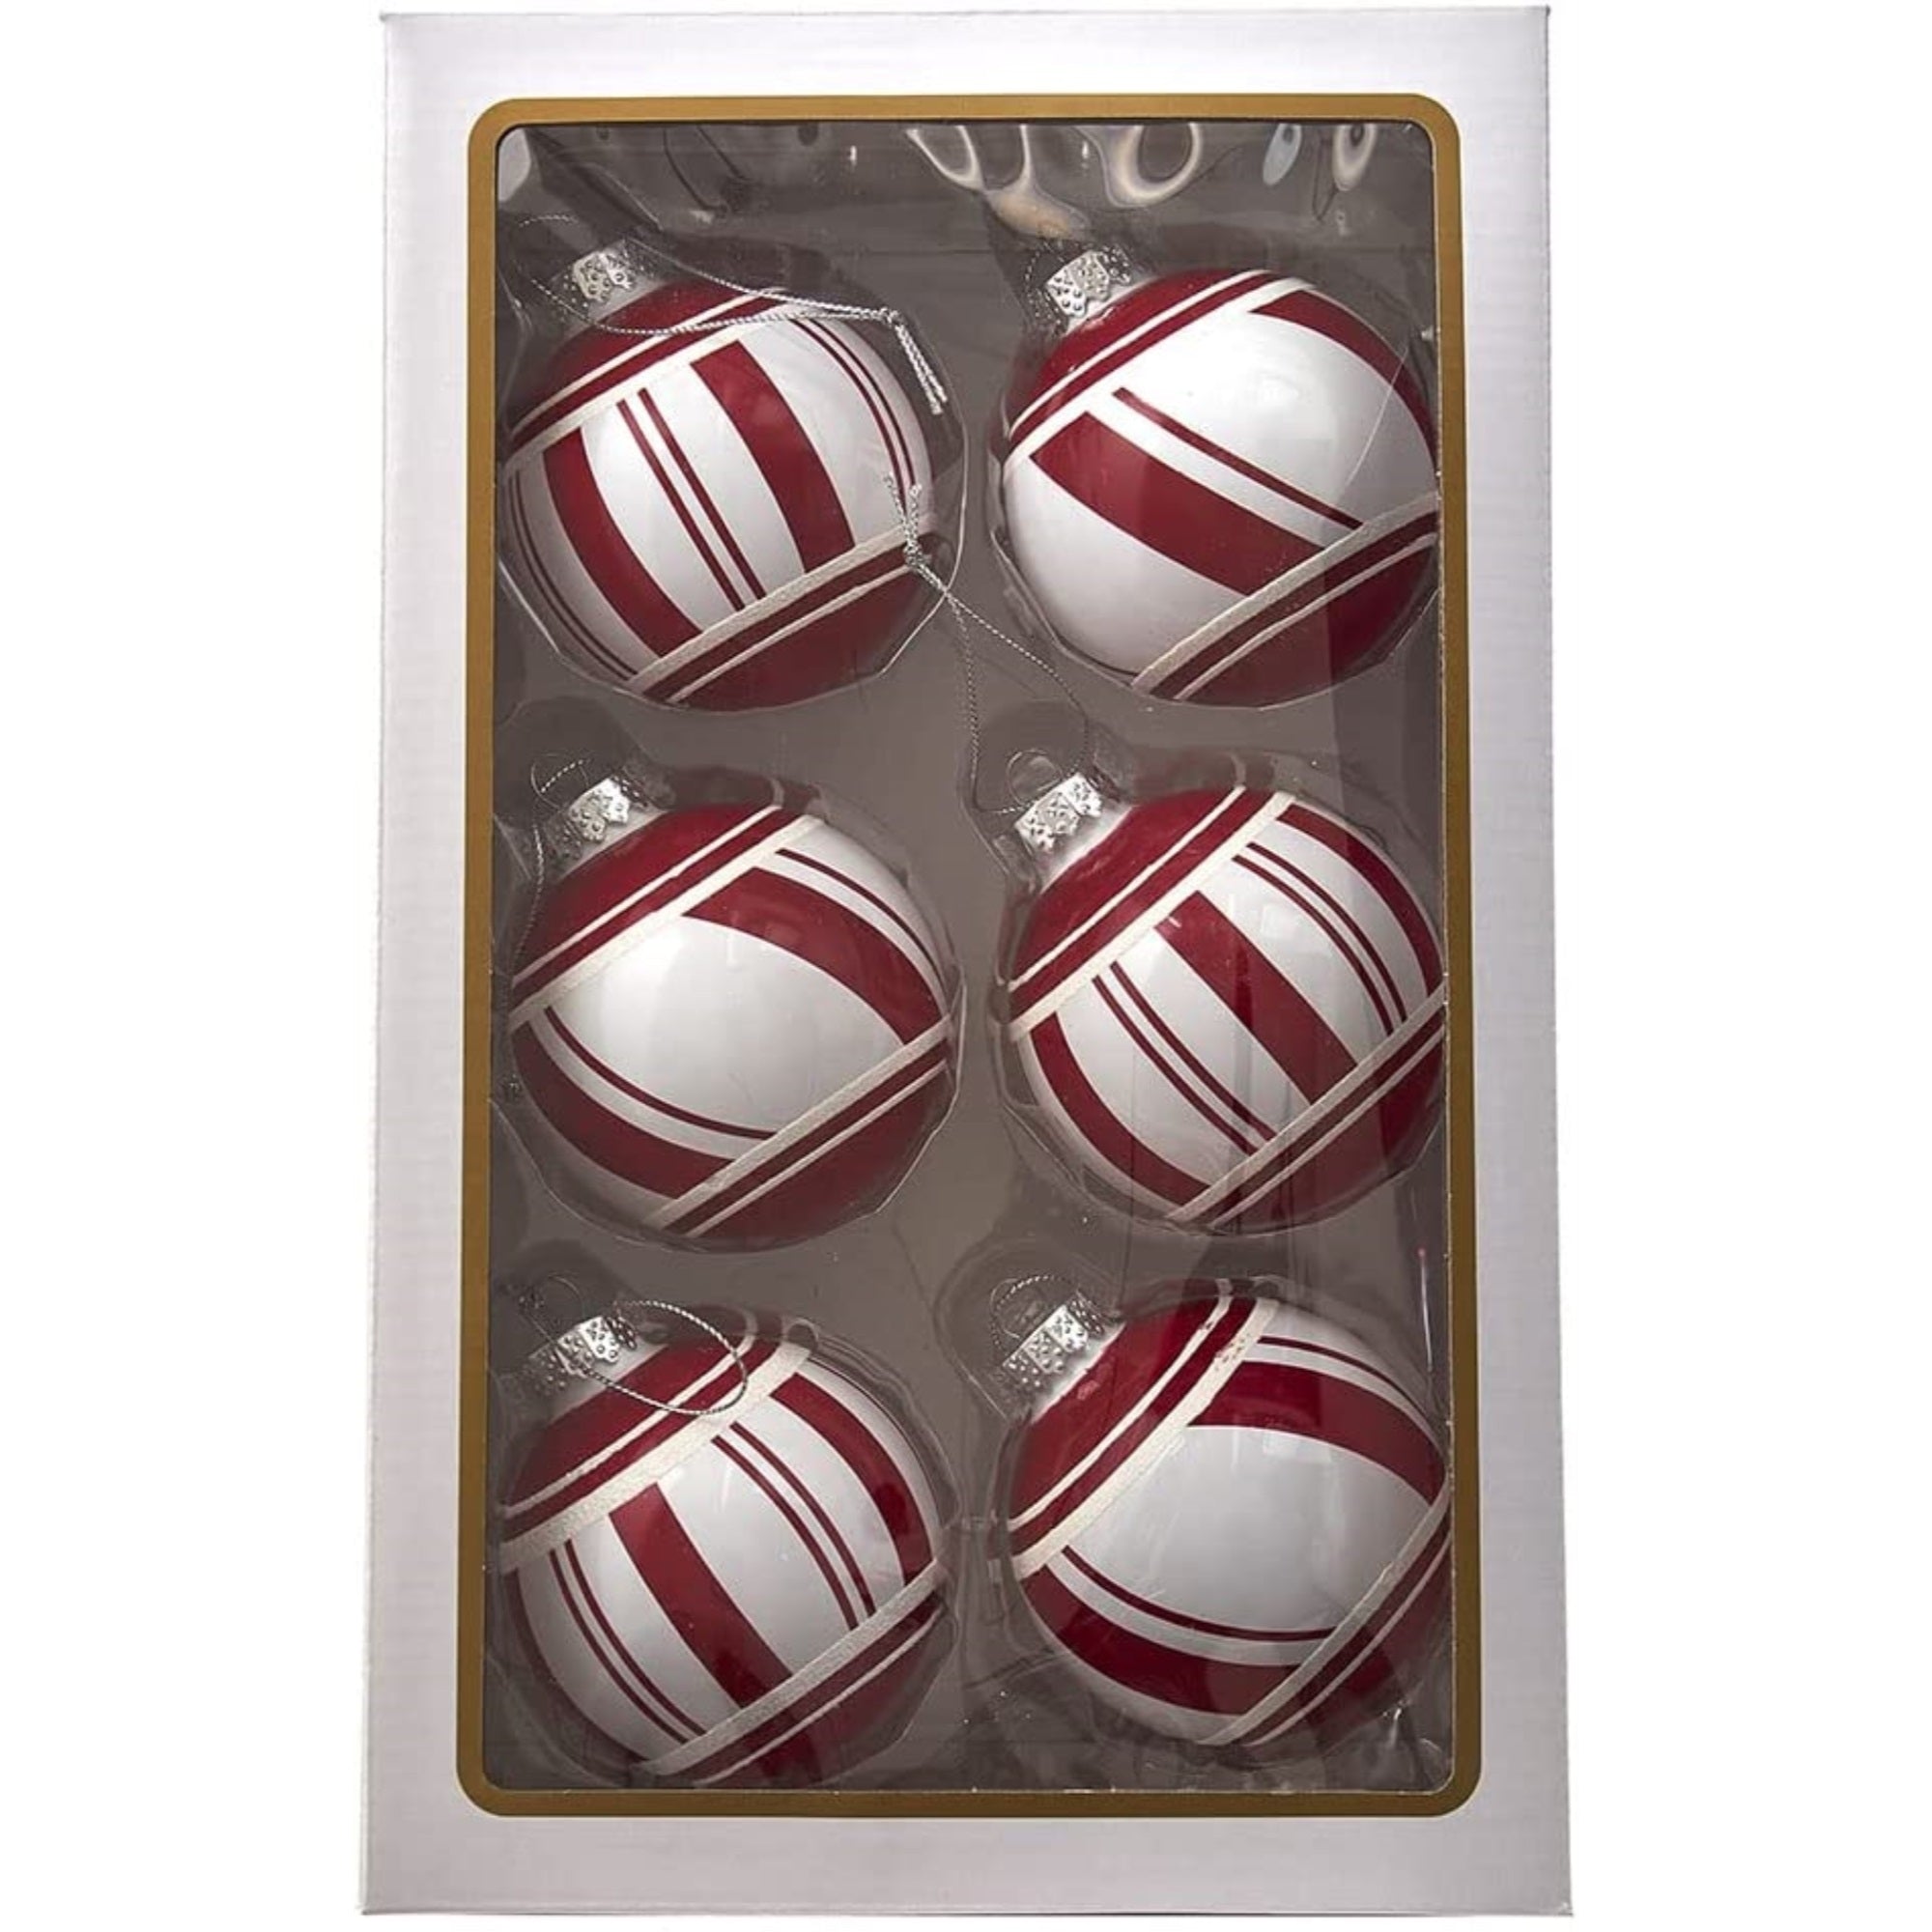 Kurt Adler Glass Red and White Ball Ornaments, 6-Piece Box, 3"